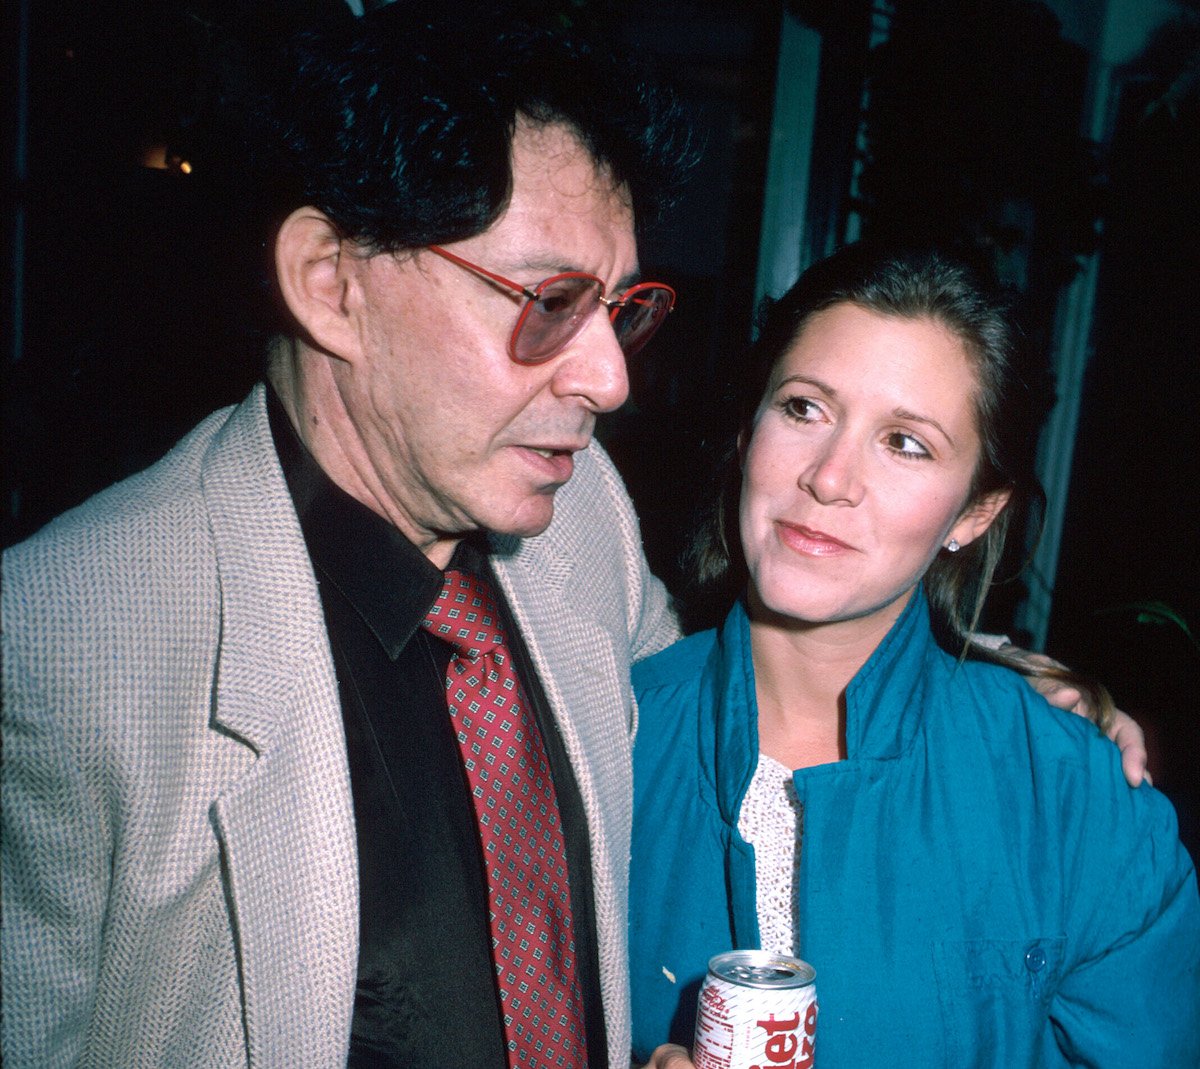 Eddie Fisher in a grey suit and daughter Carrie Fisher in a blue coat holding a Diet Coke | Time Life Pictures/DMI/The LIFE Picture Collection via Getty Images